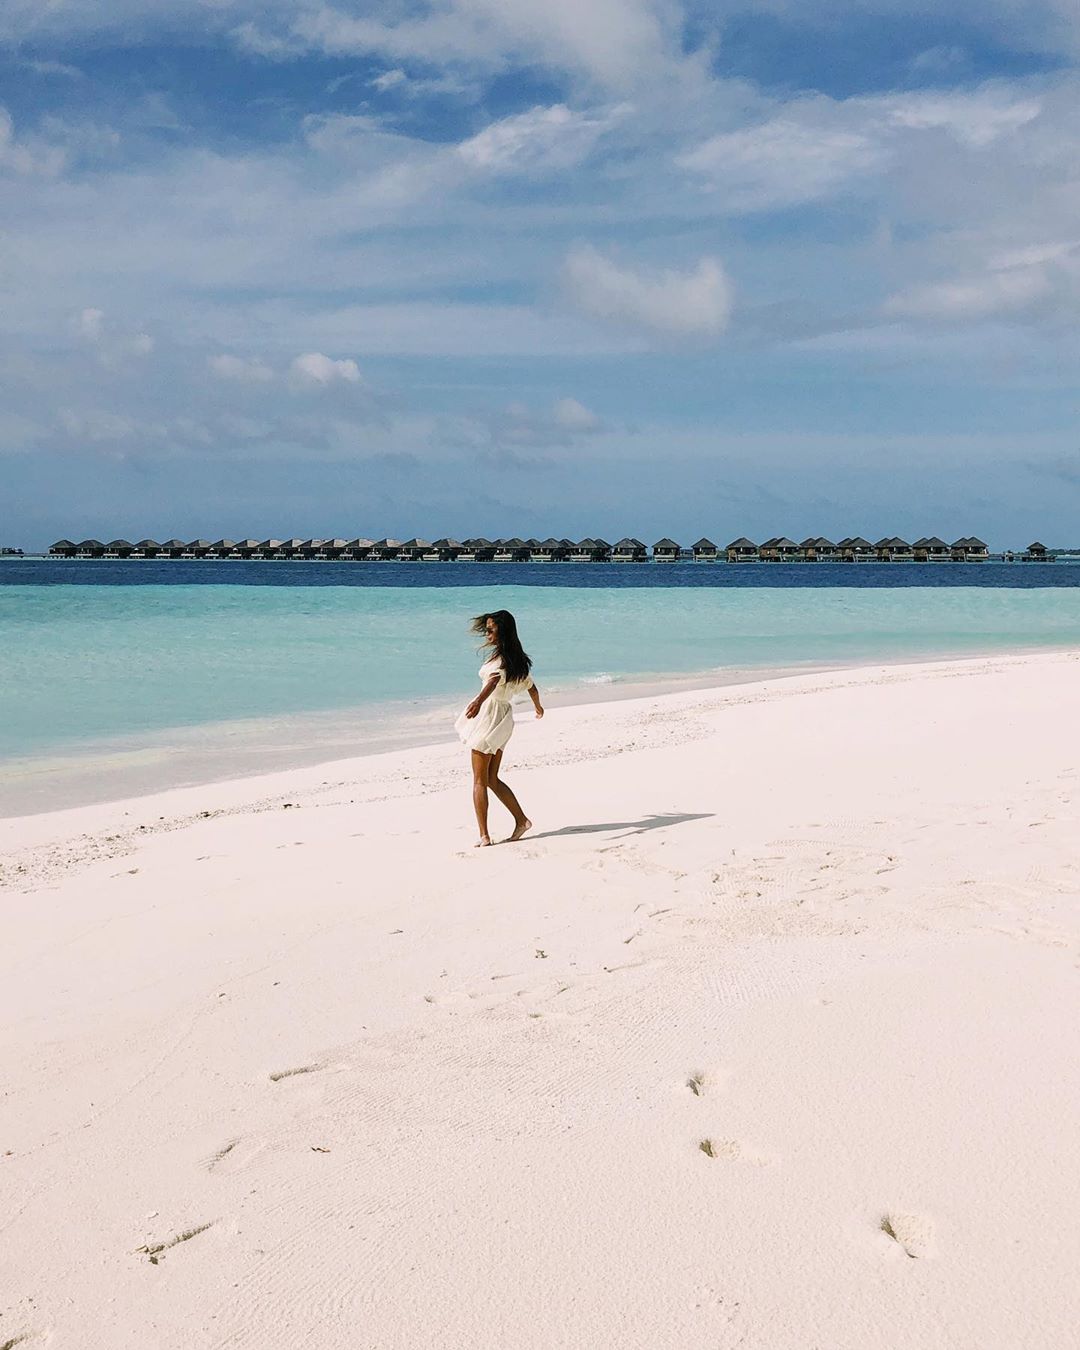 Woman Walking on a White Sand Beach. Photo by Instagram user @misselectrify